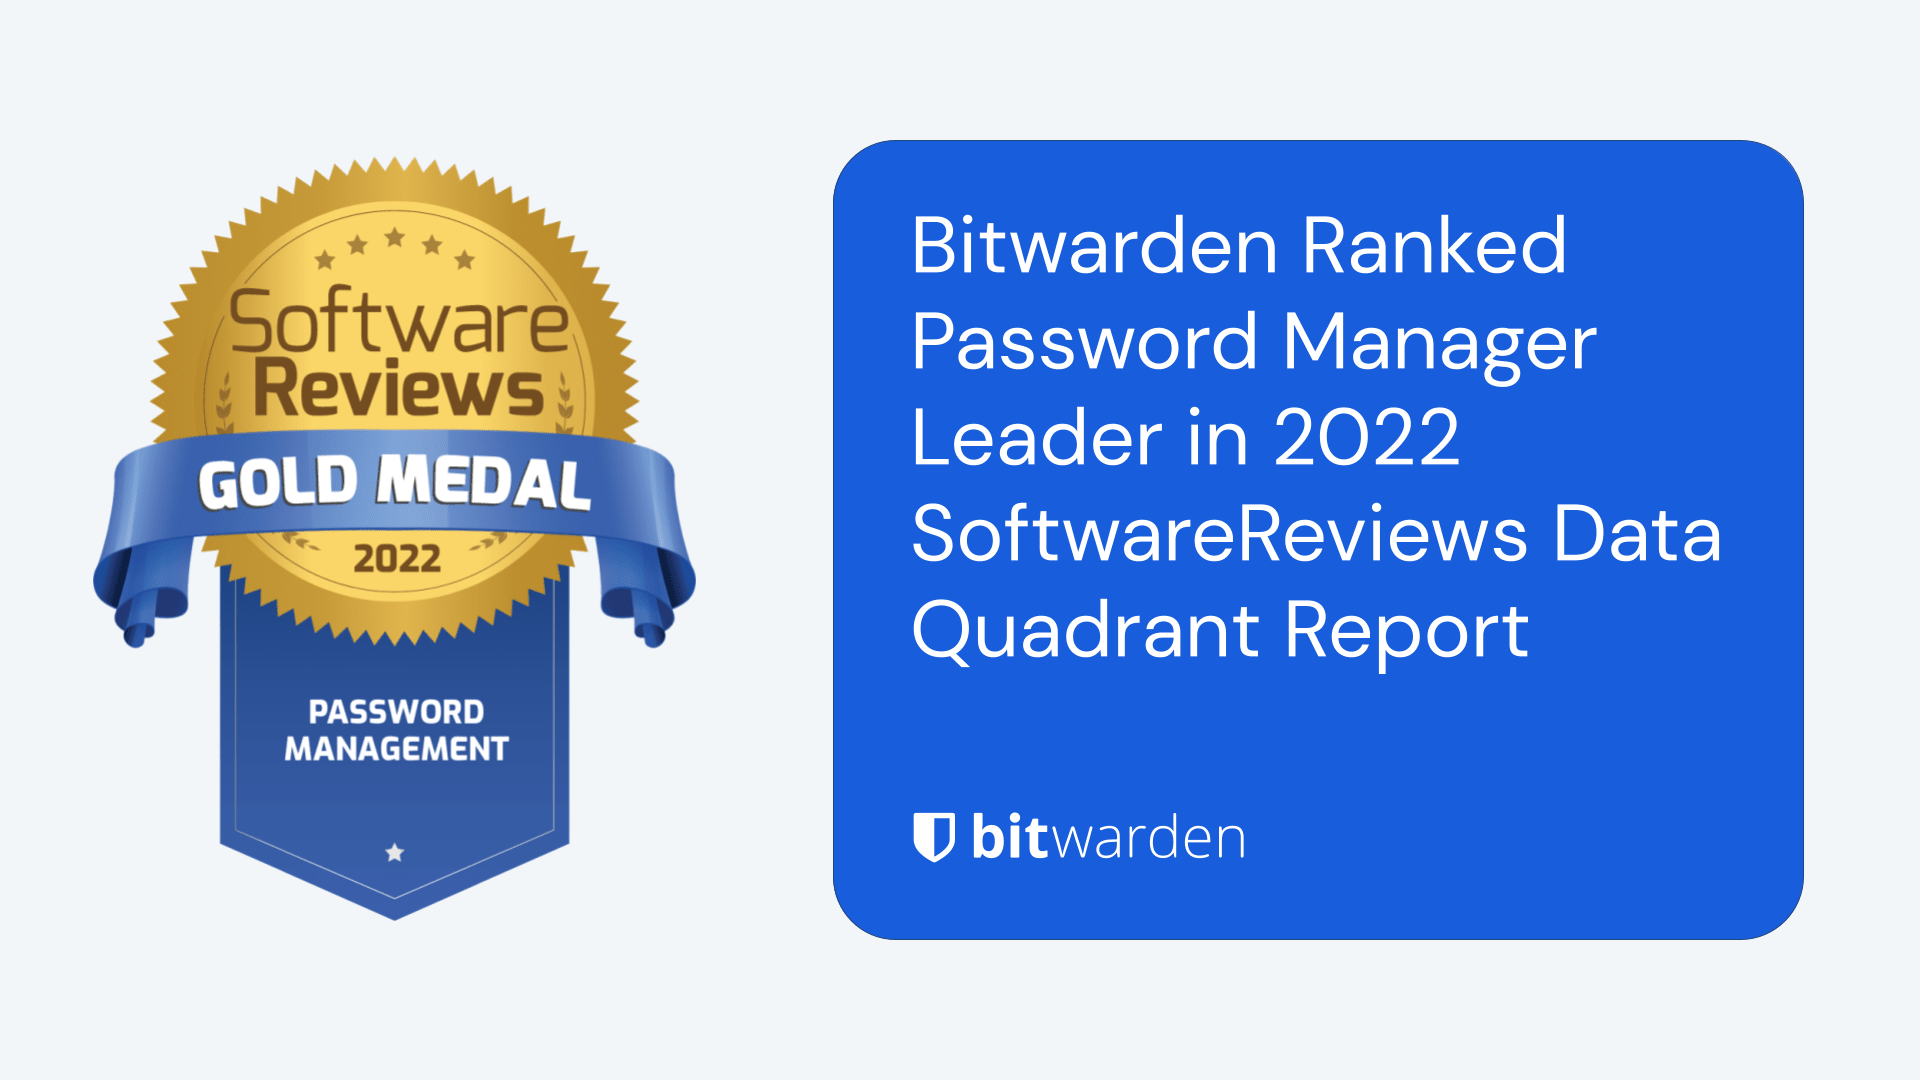 Bitwarden Ranked Password Manager Leader in 2022 SoftwareReviews Data Quadrant Report